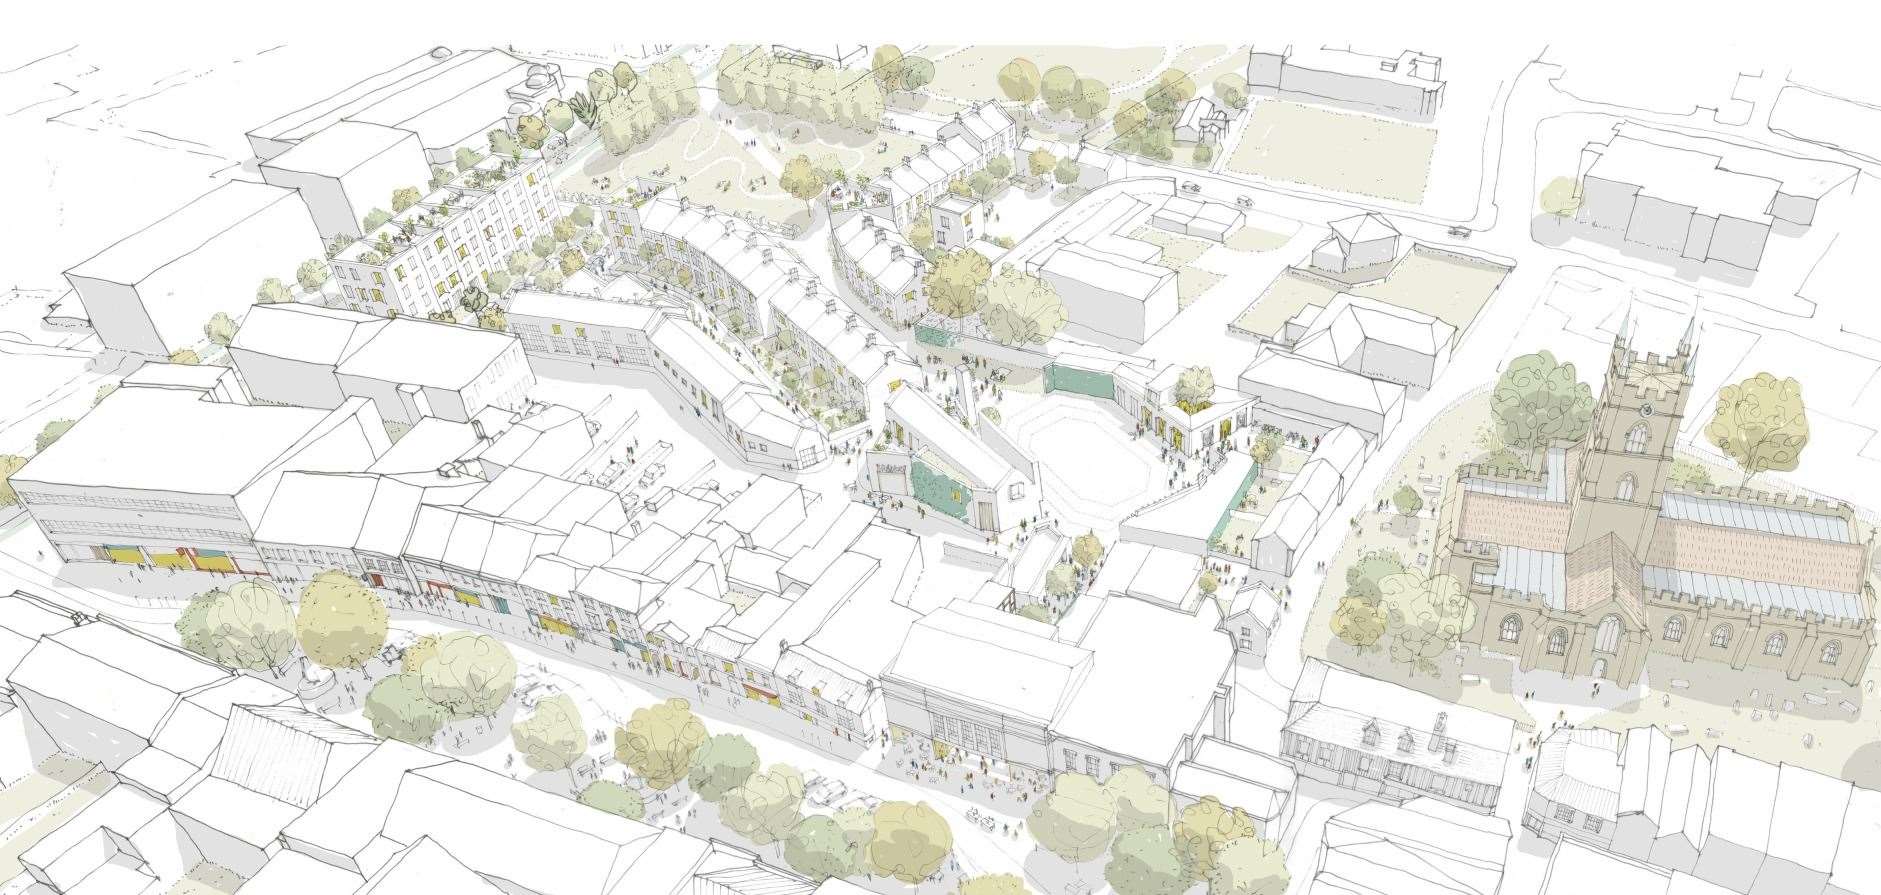 Ashford Borough Council's rejuvenation plans for the town centre depend on the delivery of the car park, which would be sited in the top left of this artist's impression